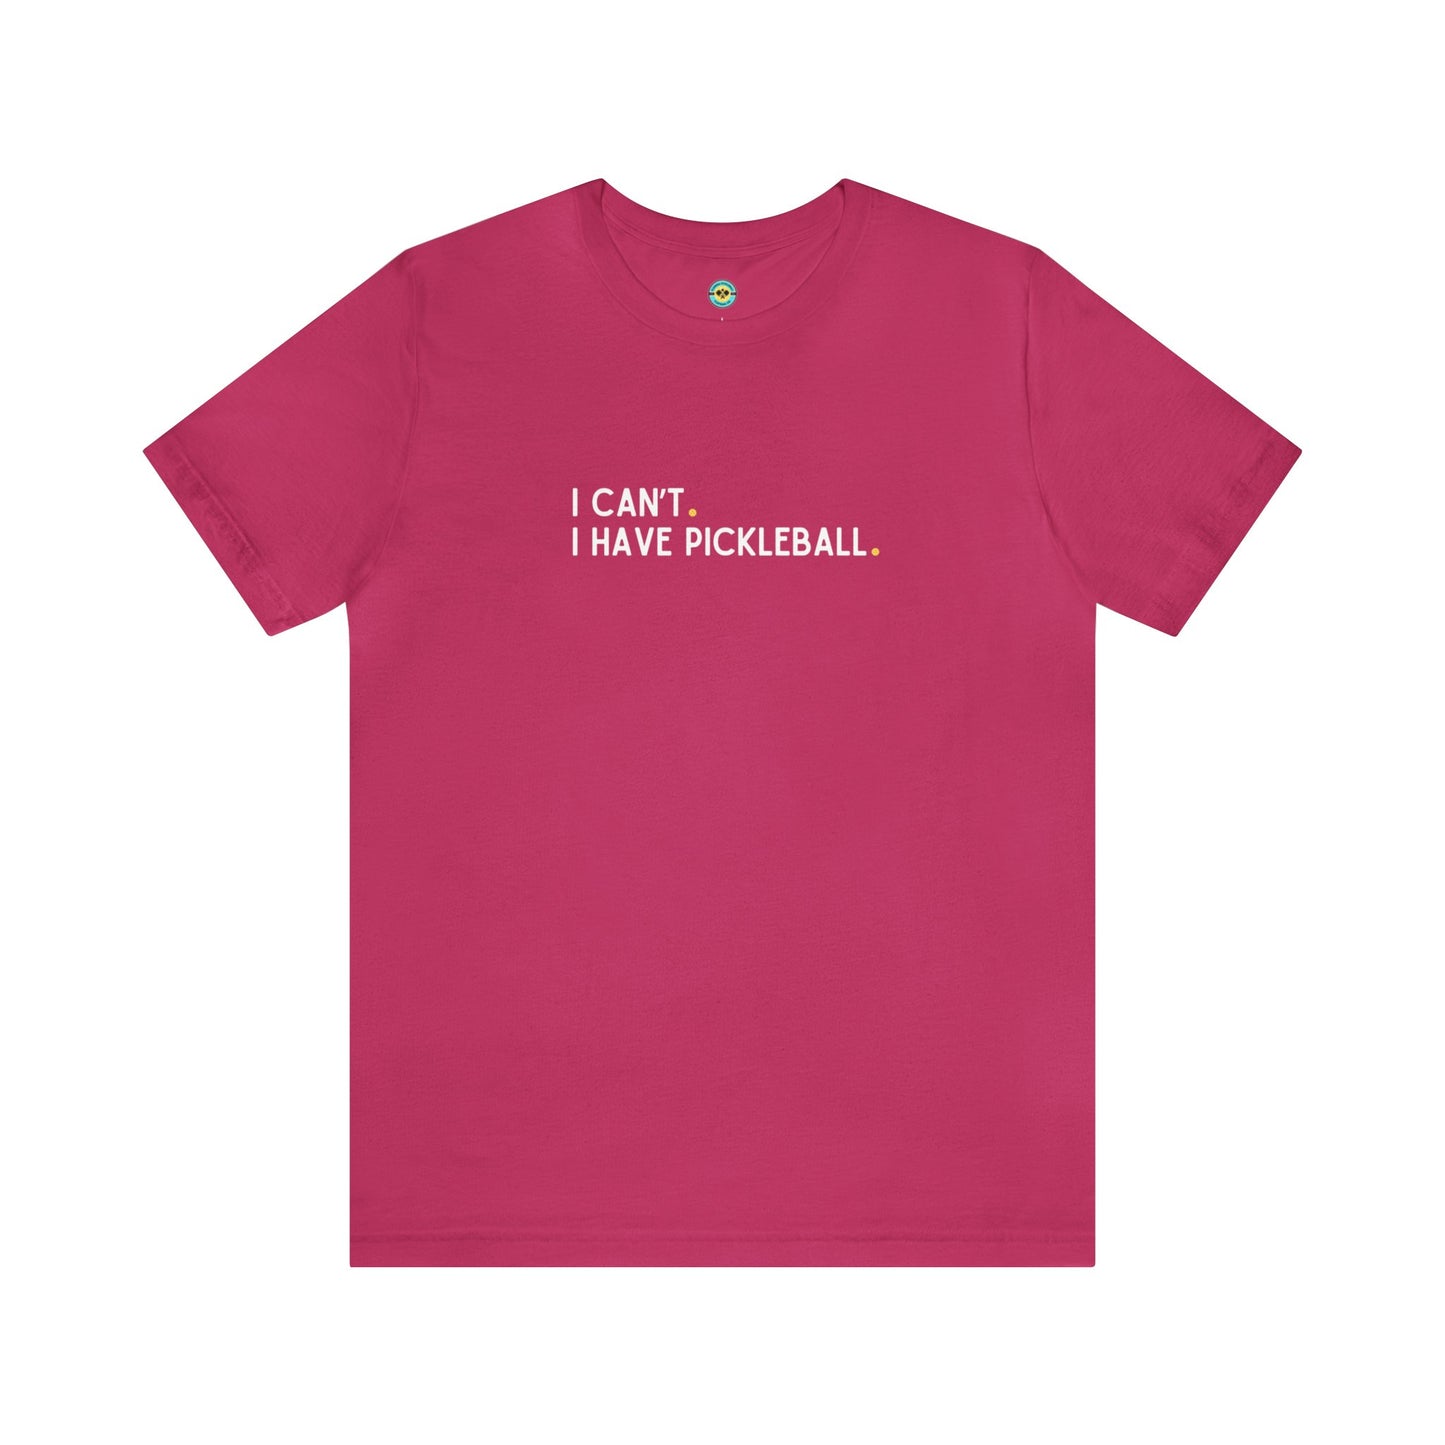 I Can't. I Have Pickleball. Unisex Tee